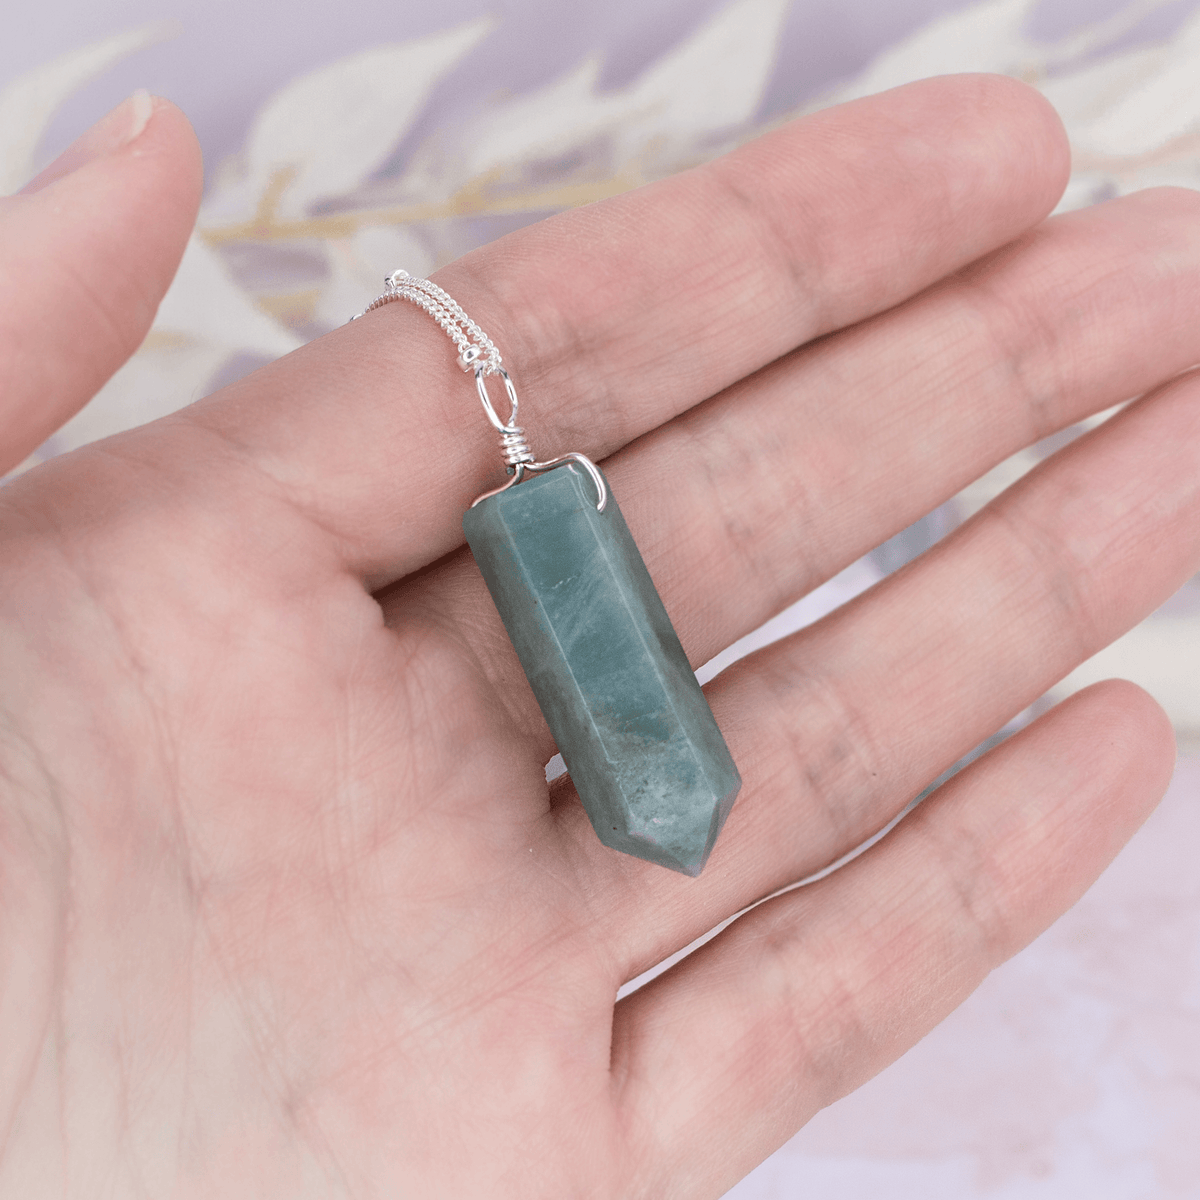 Blue Aquamarine Crystal Generator Point Pendant Necklace - Blue Aquamarine Crystal Generator Point Pendant Necklace - Sterling Silver / Cable - Luna Tide Handmade Crystal Jewellery